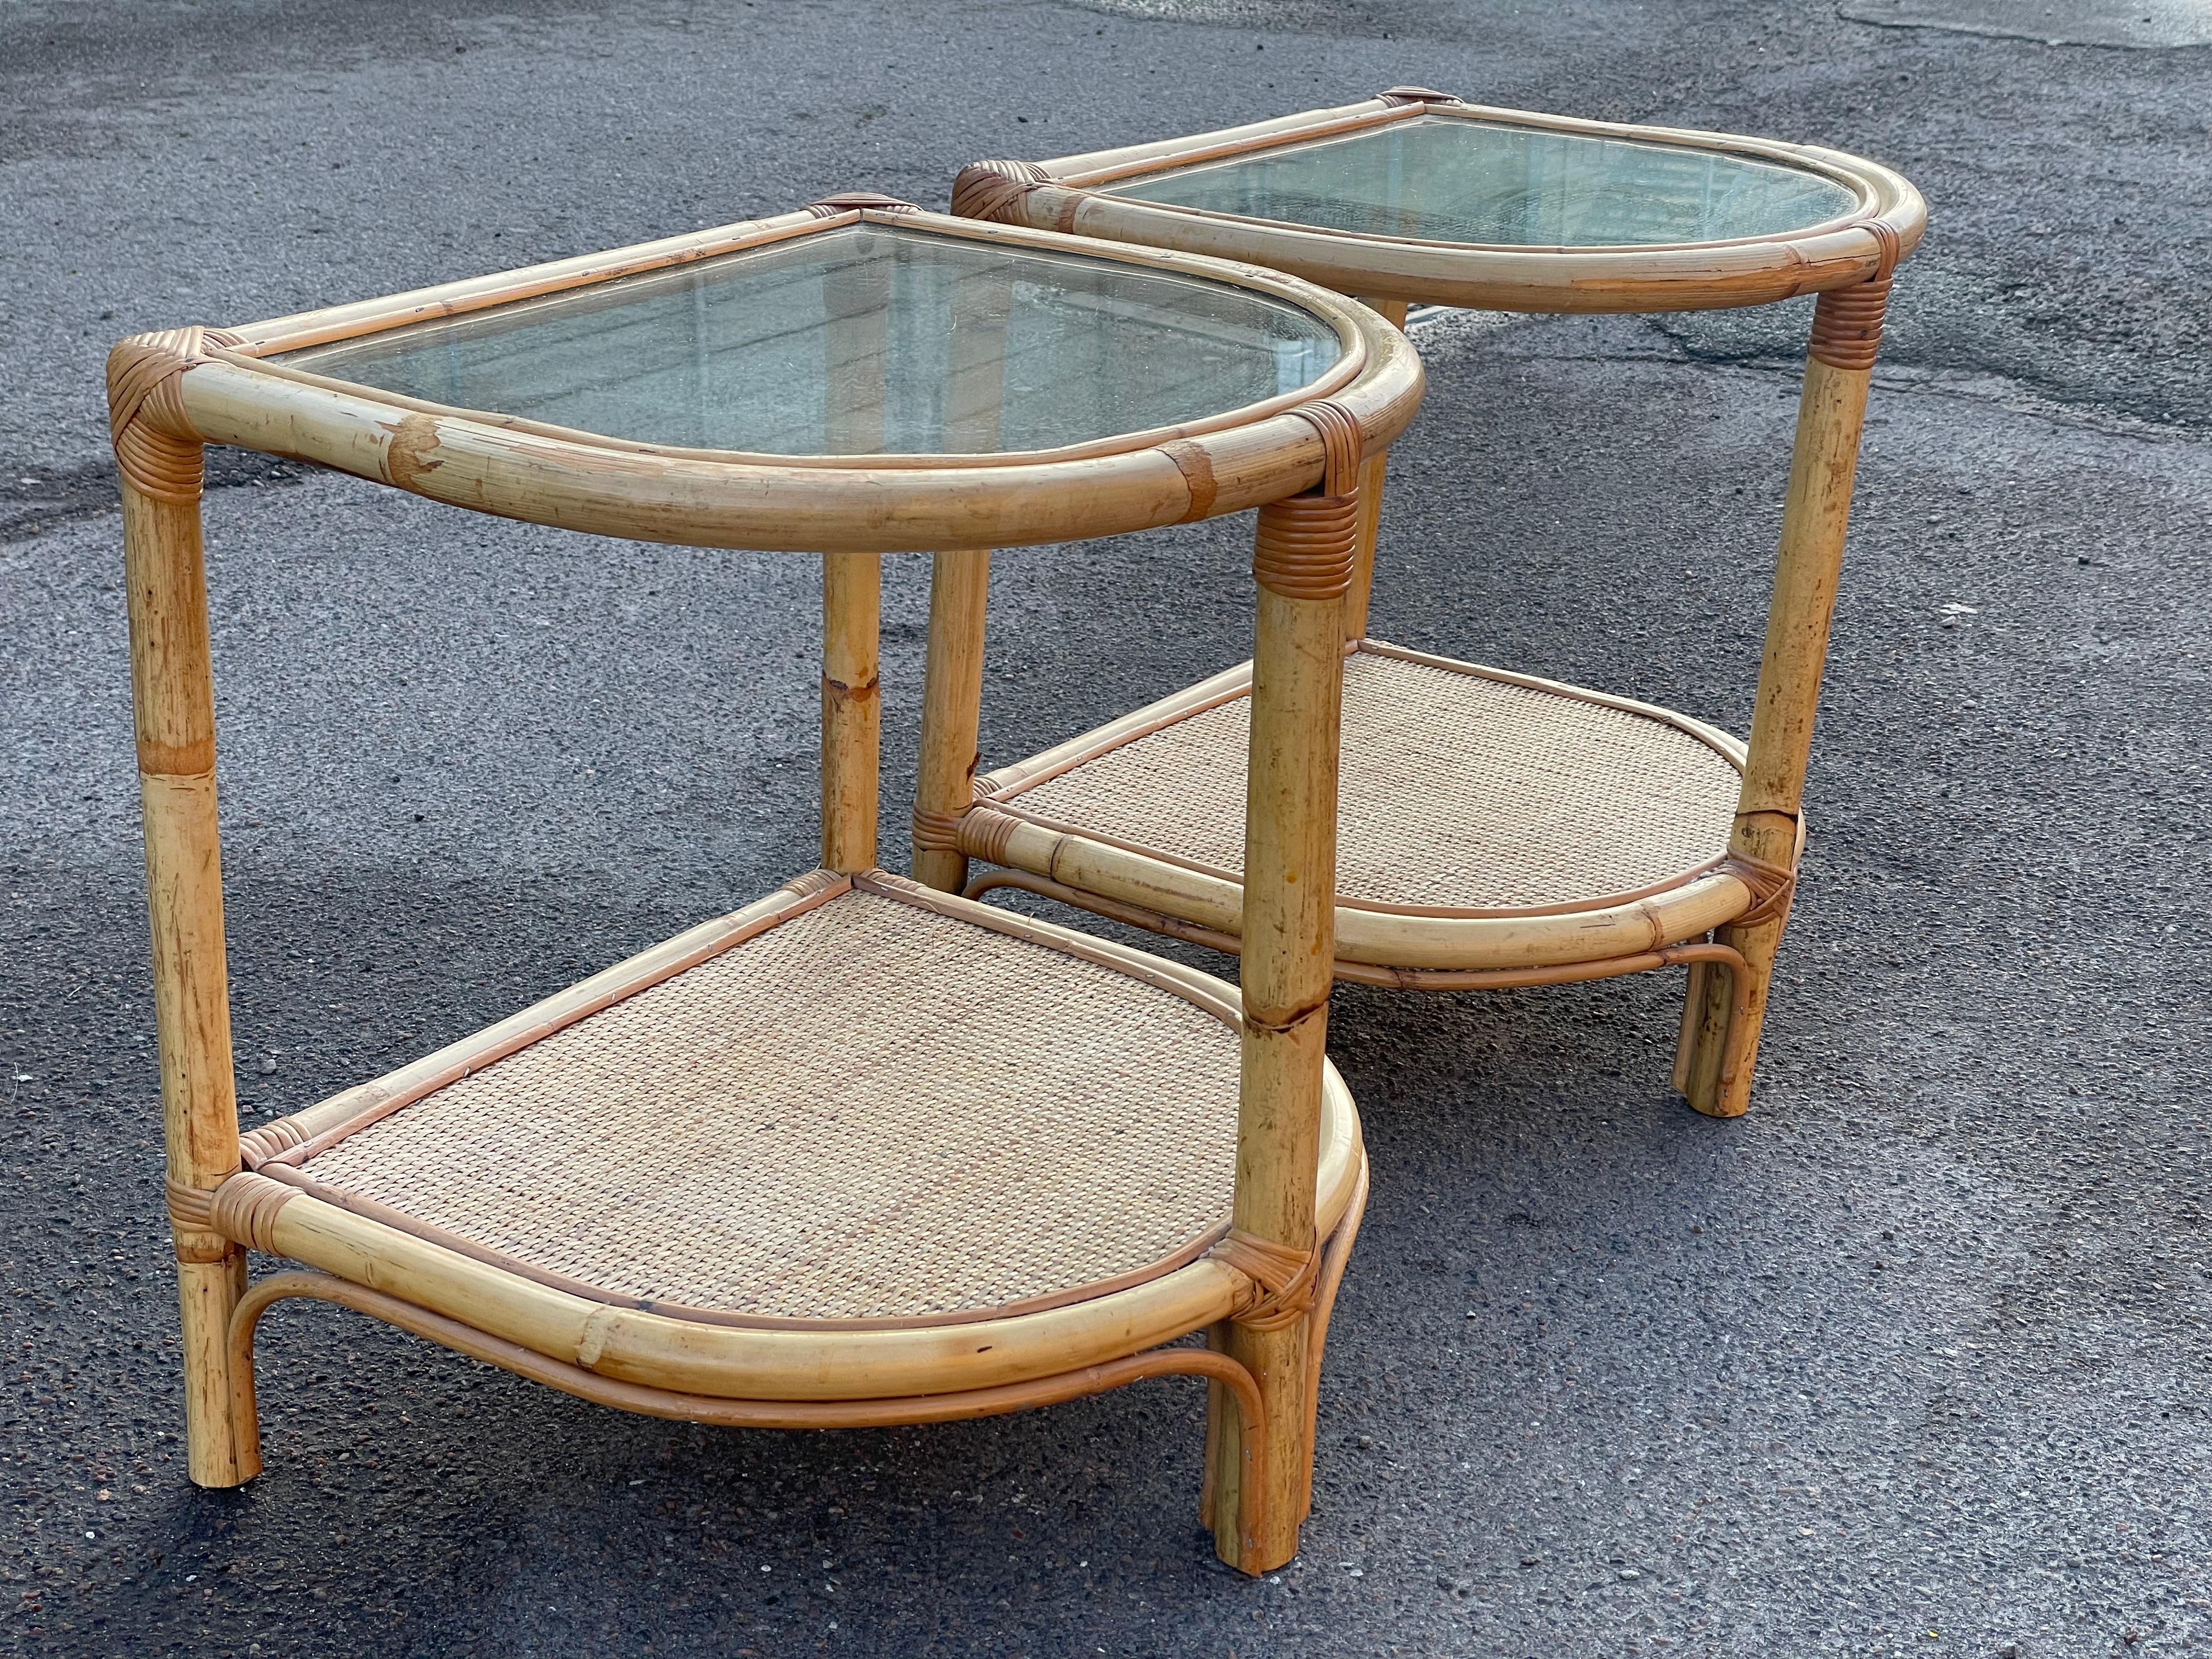 Vintage bamboo rattan nightstands, crafted in Denmark during the 1970s For Sale 5